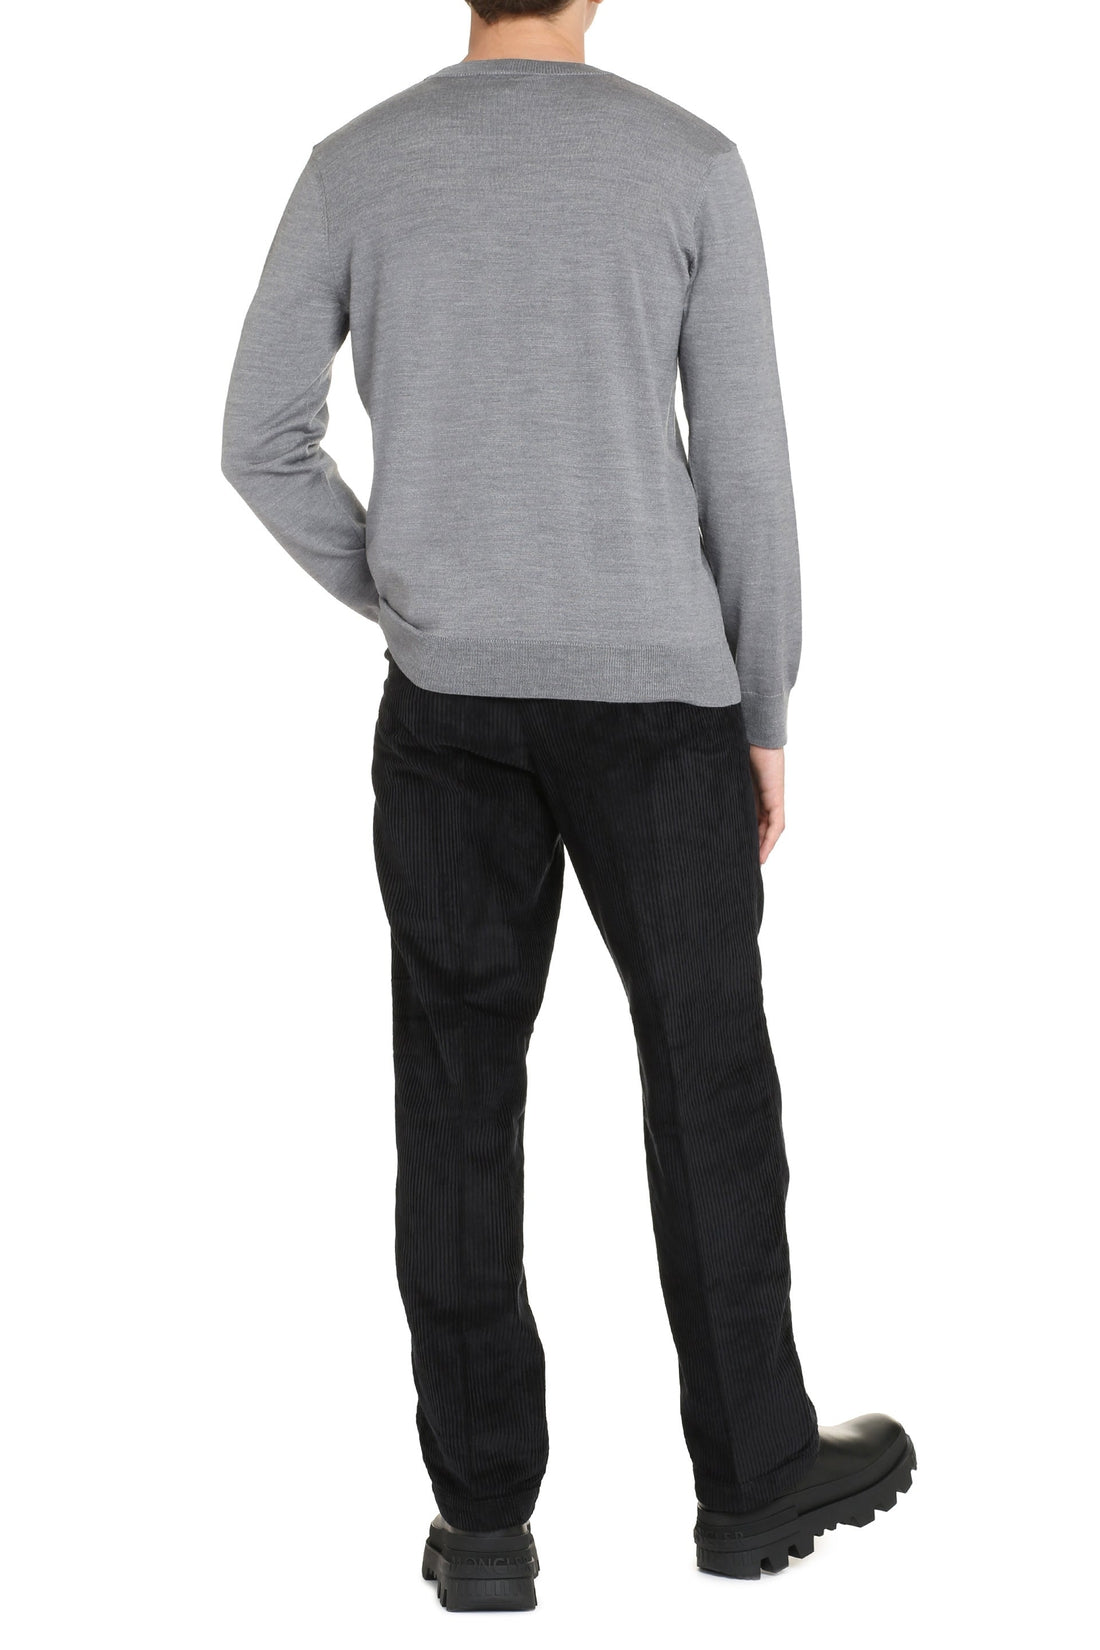 A.P.C.-OUTLET-SALE-Brian wool crew-neck sweater-ARCHIVIST